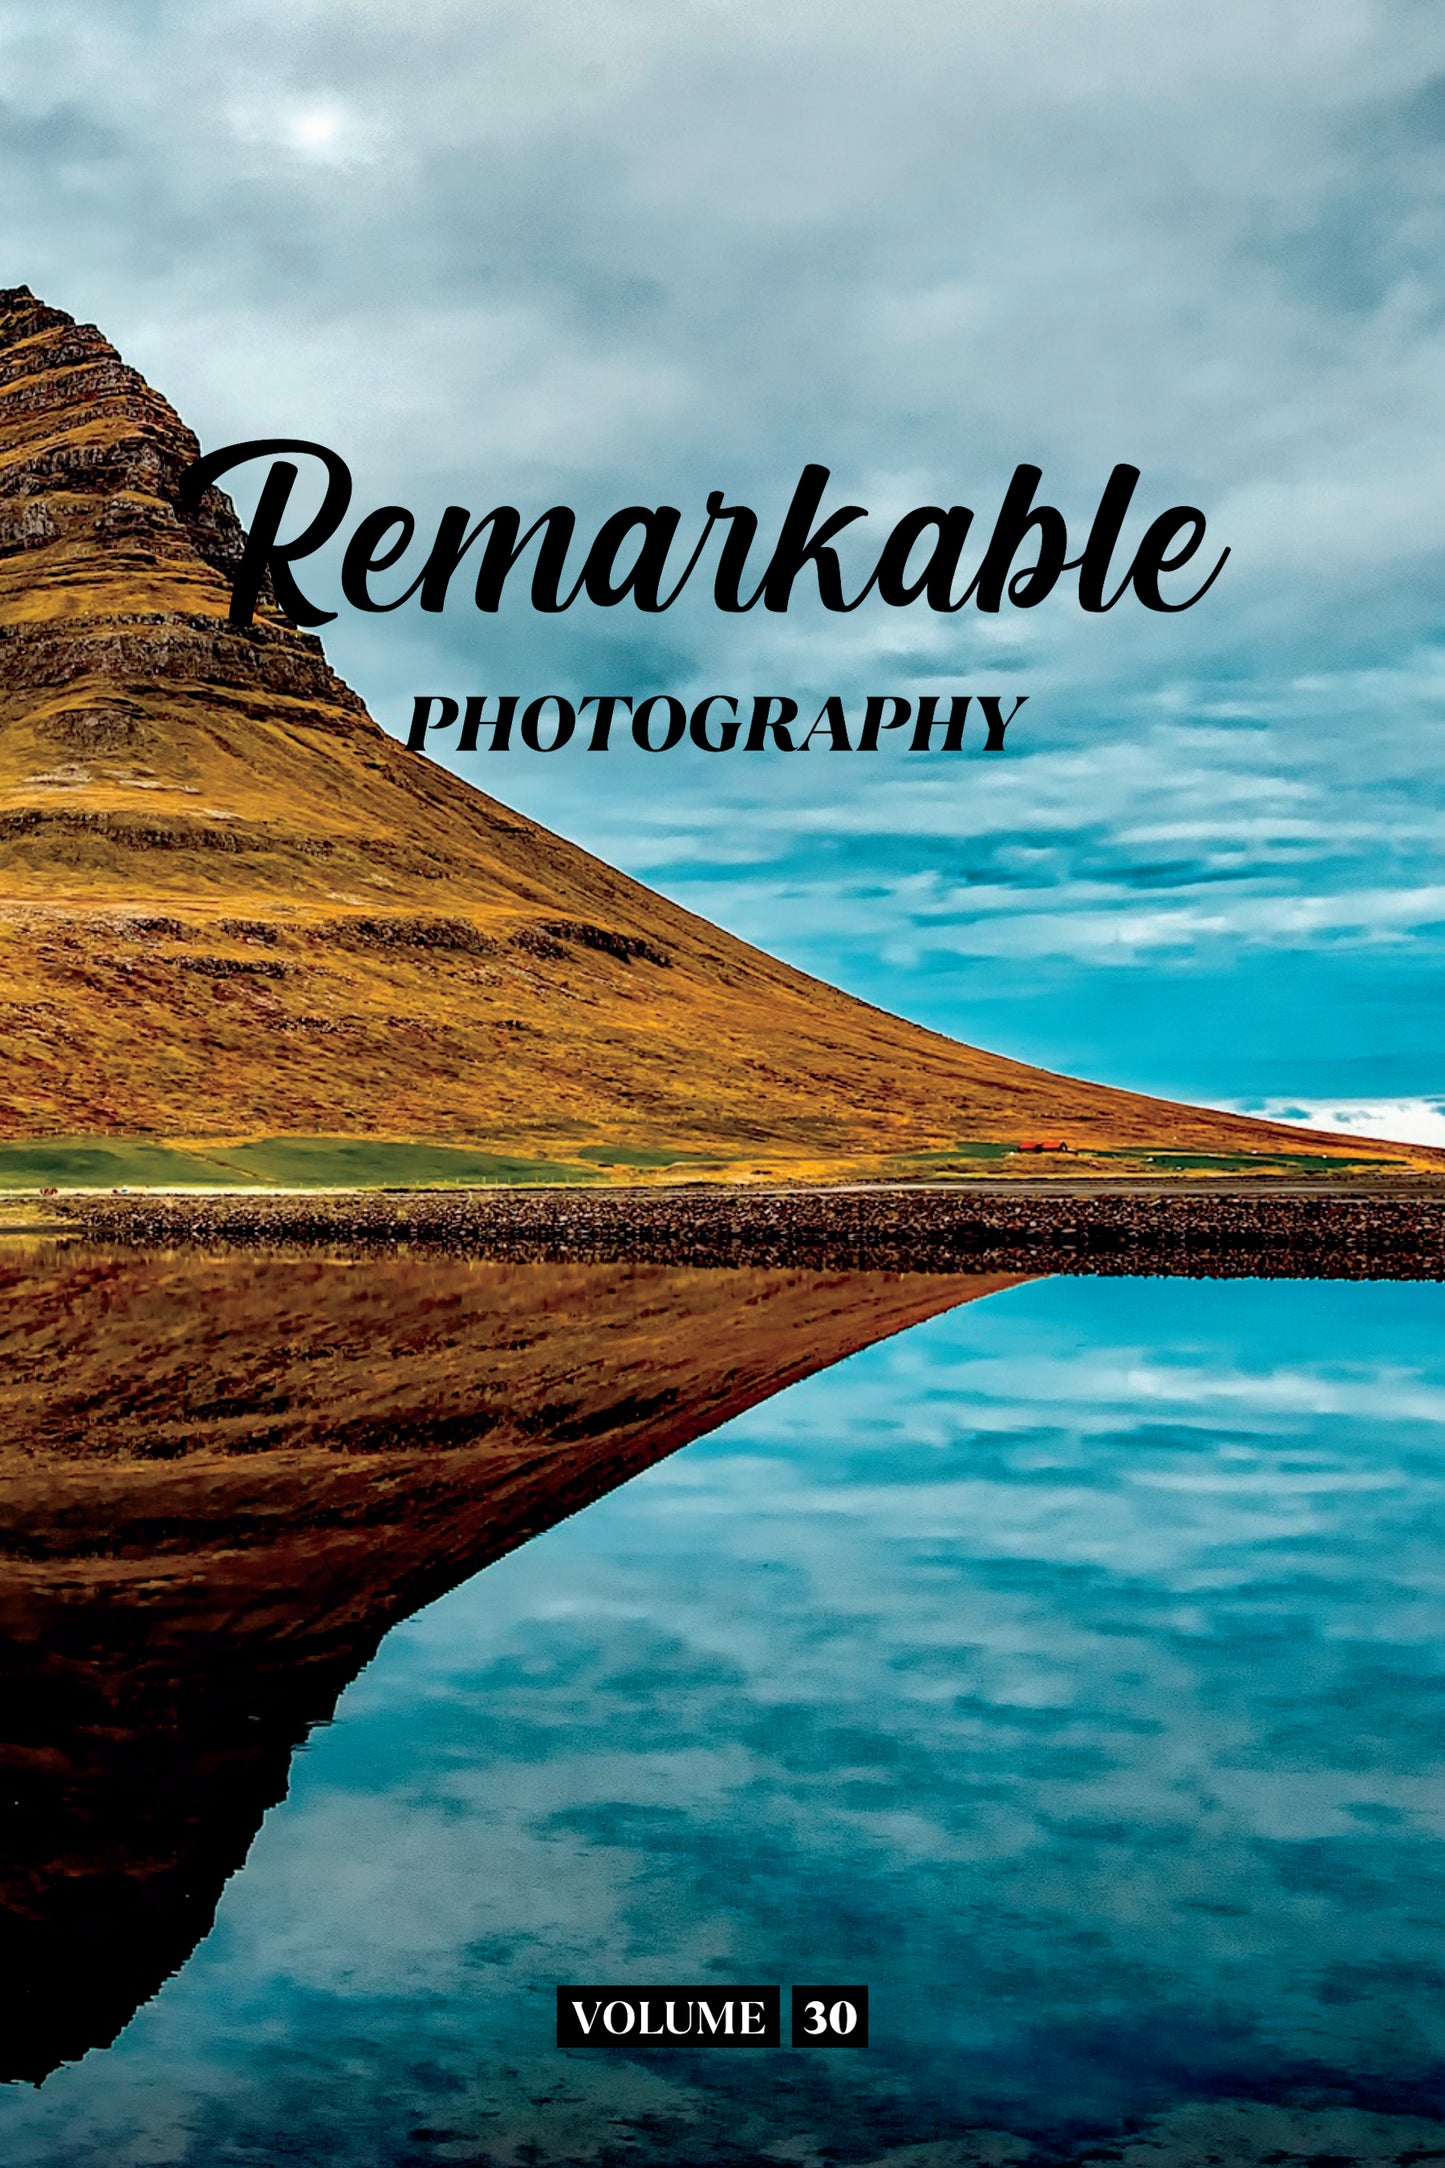 Remarkable Photography Volume 30 (Physical Book Pre-Order)